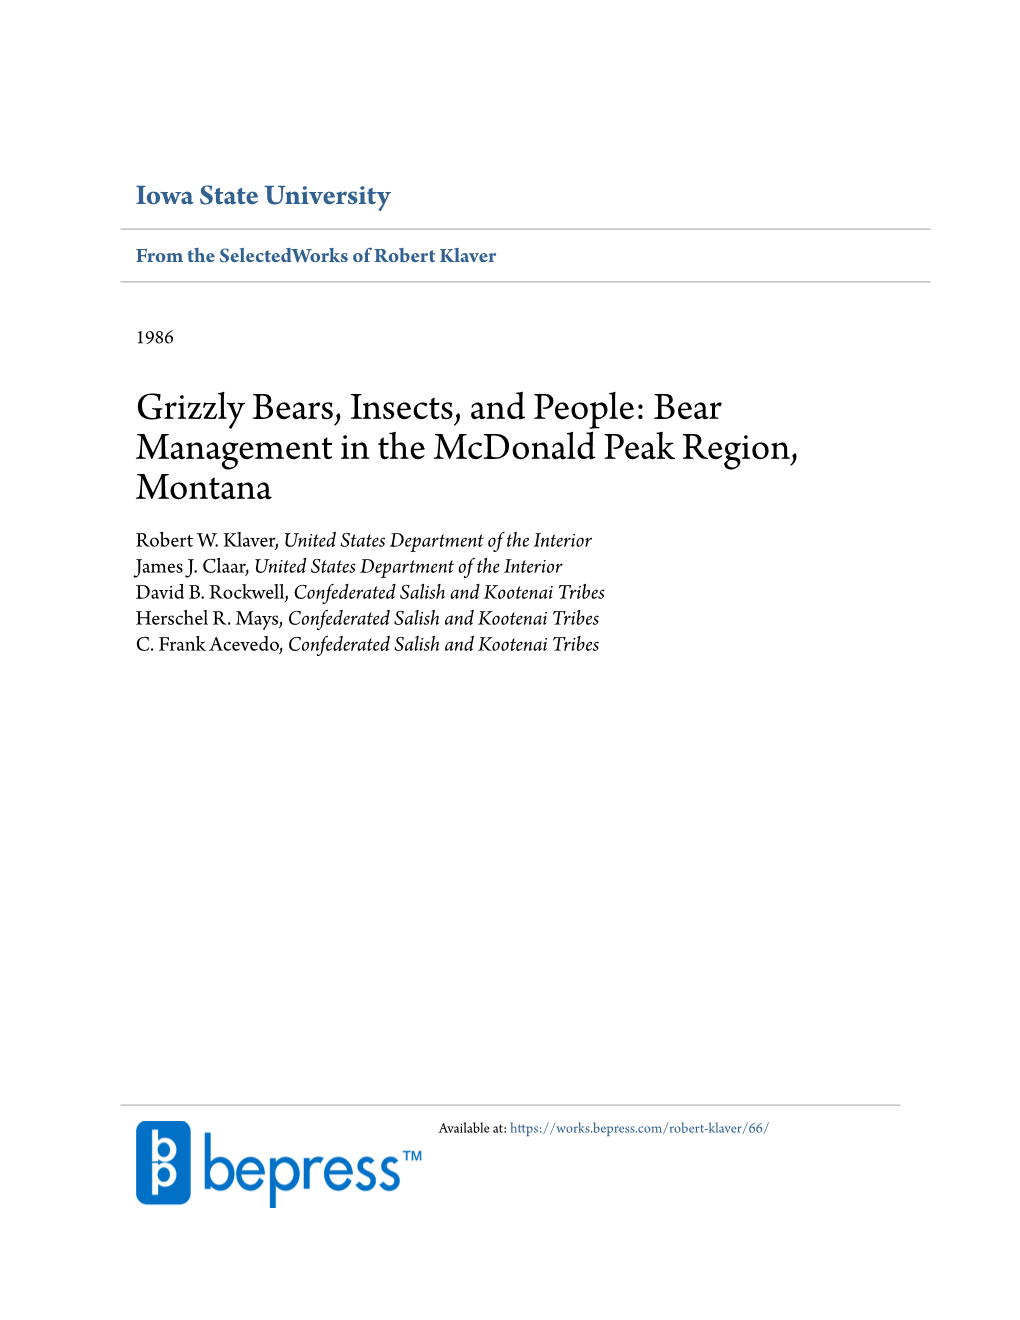 Grizzly Bears, Insects, and People: Bear Management in the Mcdonald Peak Region, Montana Robert W